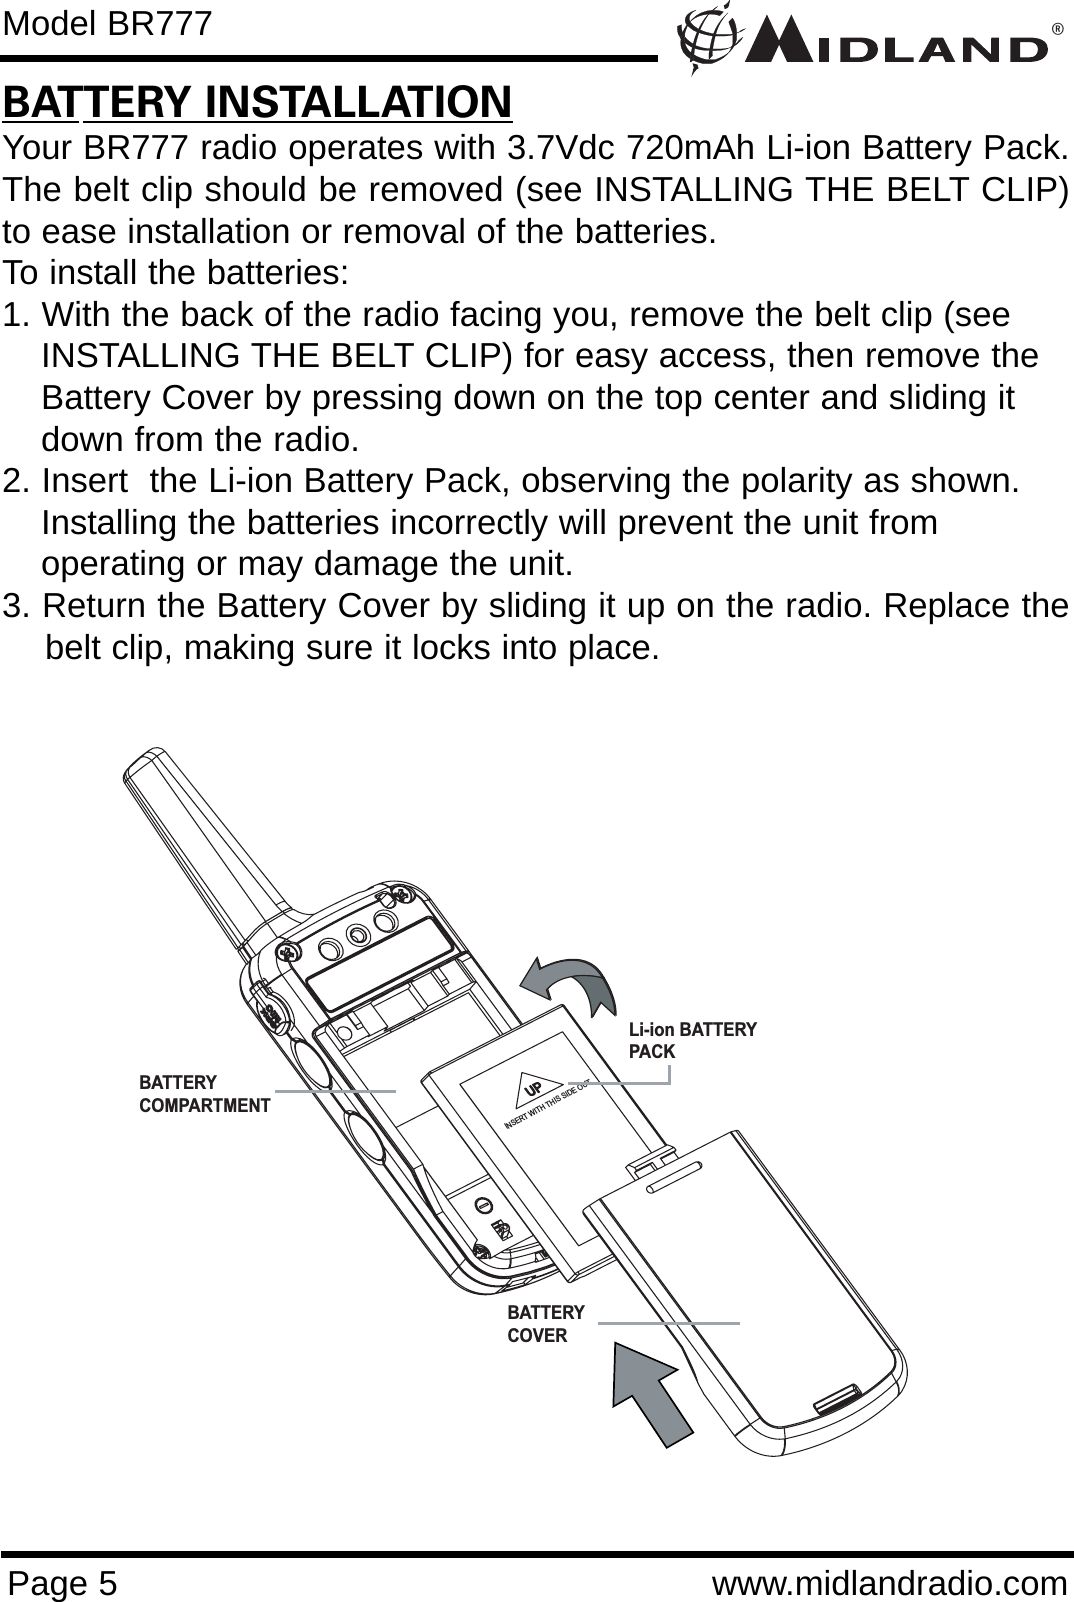 ®Page 5 www.midlandradio.comBATTERY INSTALLATIONYour BR777 radio operates with 3.7Vdc 720mAh Li-ion Battery Pack.The belt clip should be removed (see INSTALLING THE BELT CLIP)to ease installation or removal of the batteries. To install the batteries:1. With the back of the radio facing you, remove the belt clip (see INSTALLING THE BELT CLIP) for easy access, then remove the Battery Cover by pressing down on the top center and sliding it down from the radio.2. Insert  the Li-ion Battery Pack, observing the polarity as shown. Installing the batteries incorrectly will prevent the unit from operating or may damage the unit.3. Return the Battery Cover by sliding it up on the radio. Replace thebelt clip, making sure it locks into place.INSERT WITH THIS SIDE OUTBATTERY COMPARTMENTBATTERY COVERLi-ion BATTERYPACKModel BR777